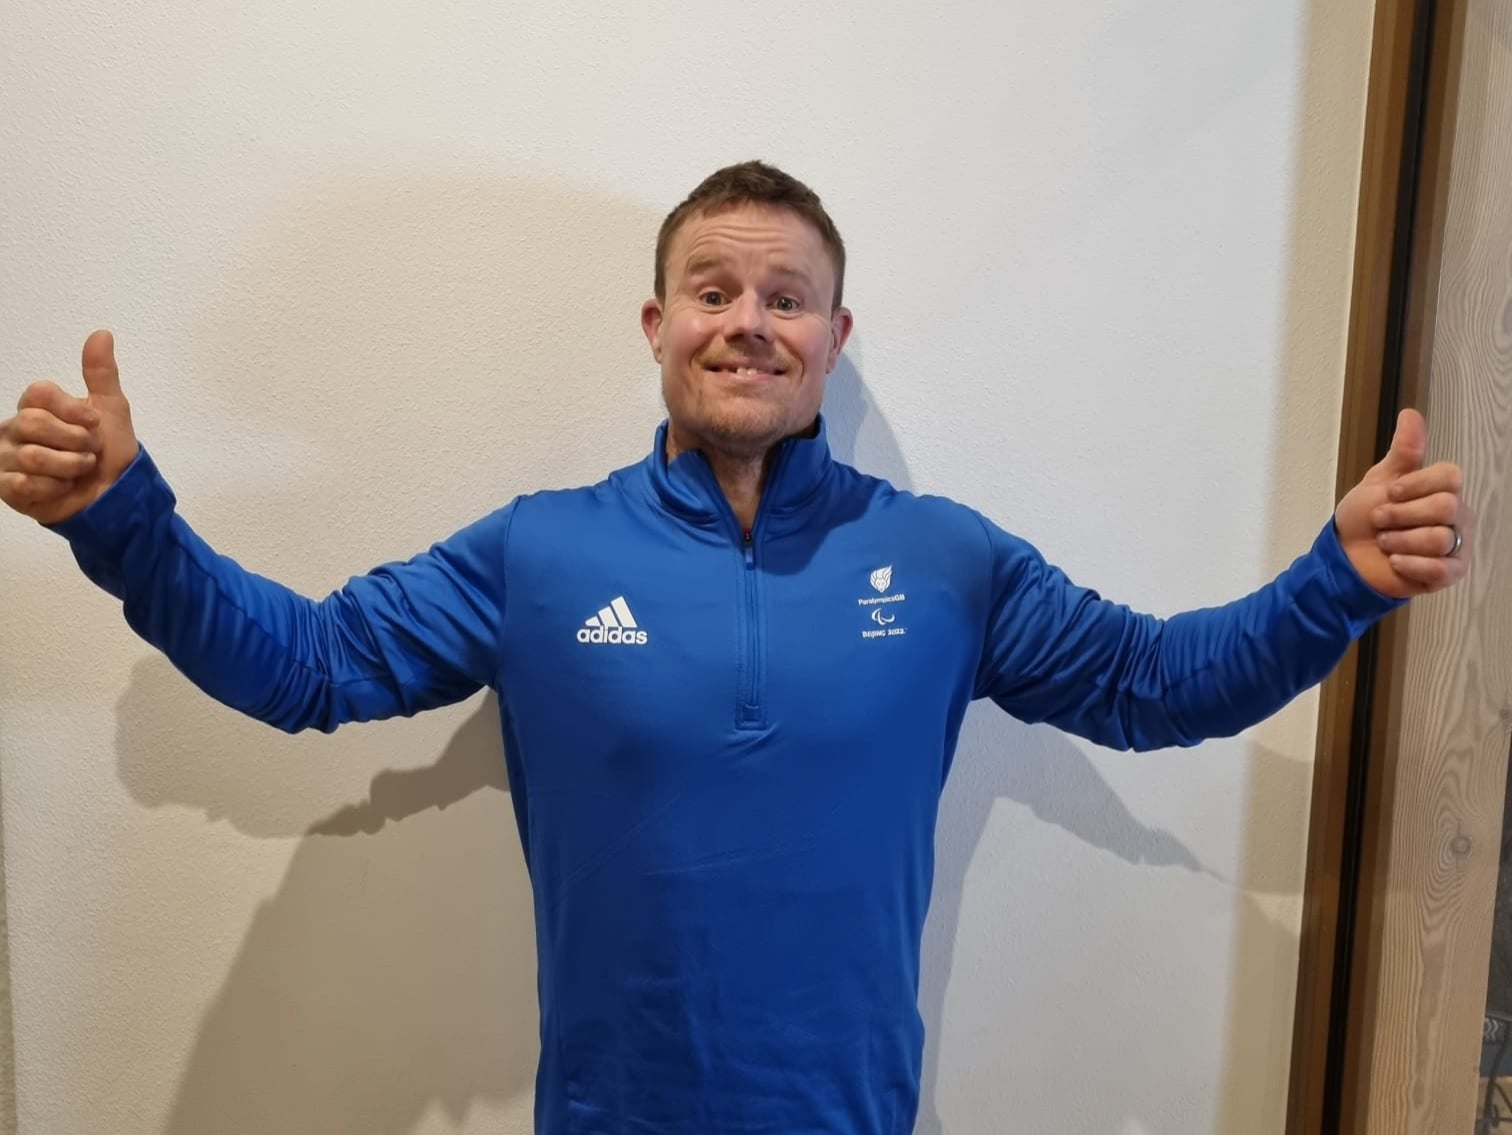 Steve Thomas is heading to his sixth Paralympic Games but his first as a Nordic skier